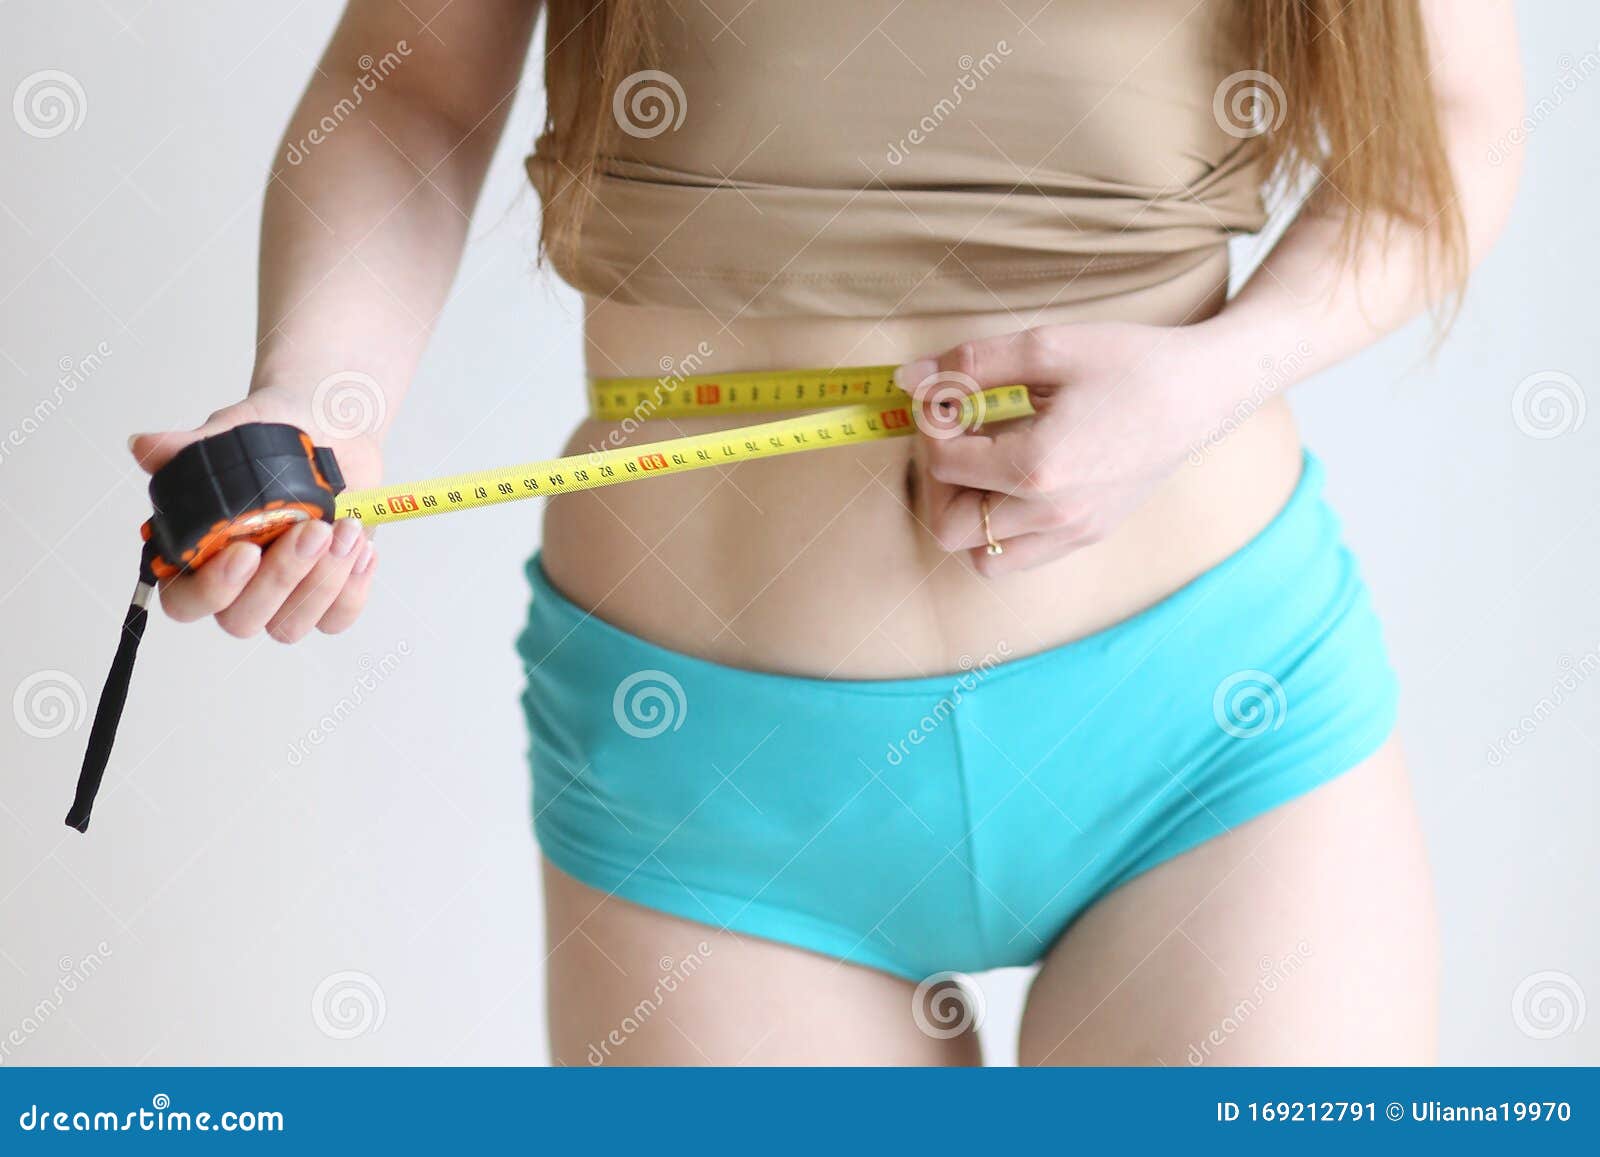 Close Up Photo of Model Girl Measure Her Waist with Measuring Tape